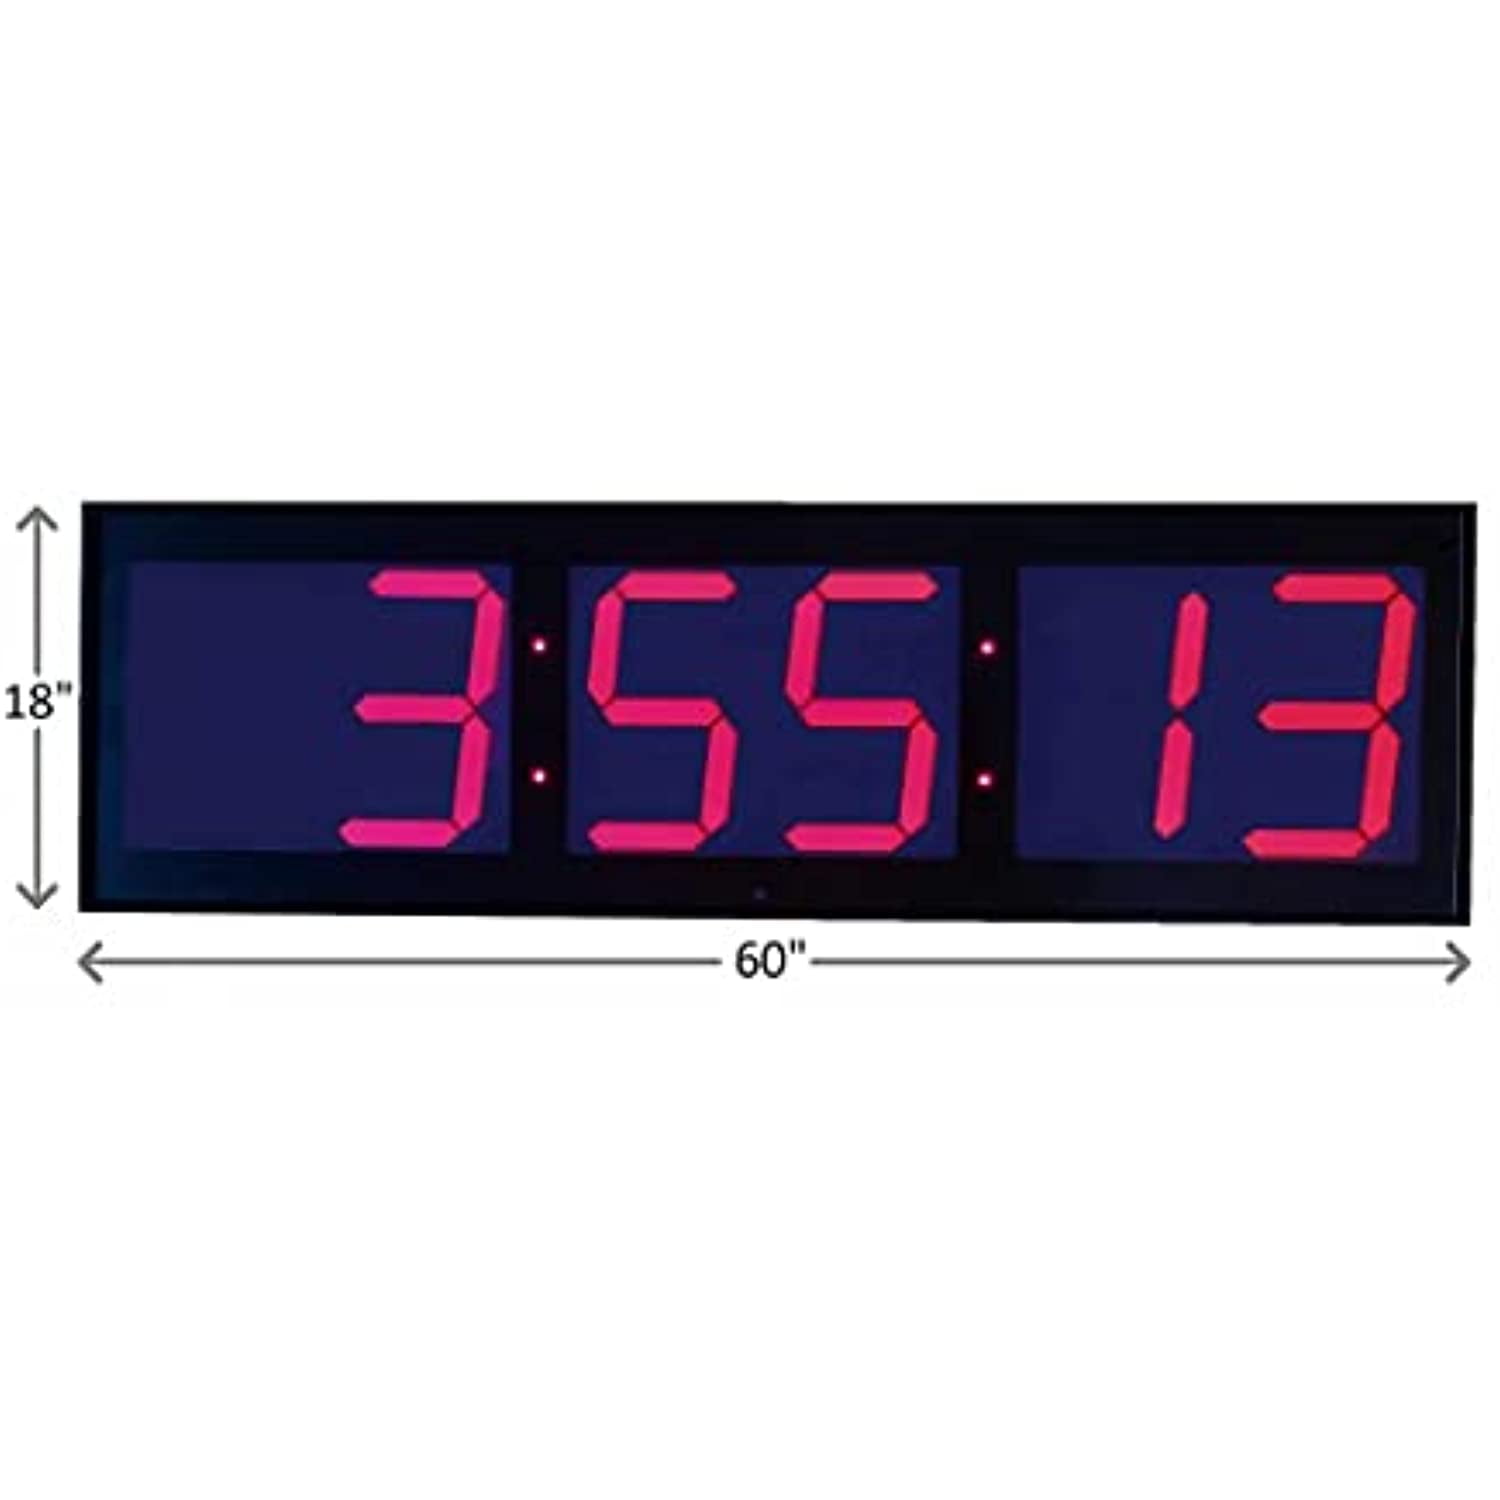 Huge Industrial Warehouse Cafeteria Gym Clock Stopwatch Countdown